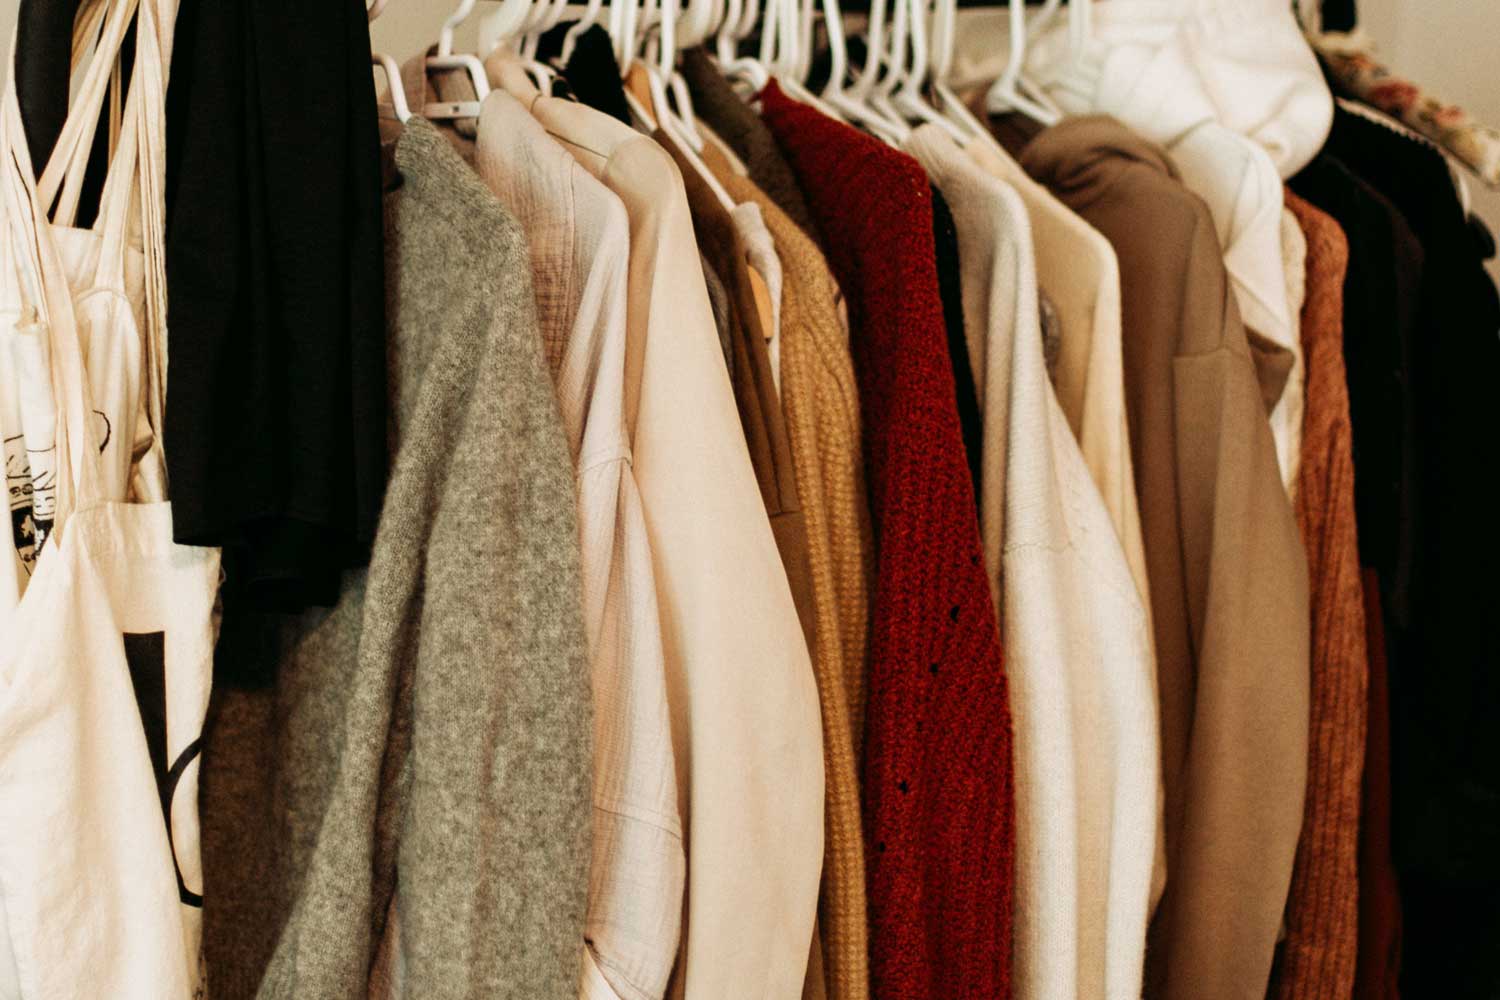 sweaters hanging in closet